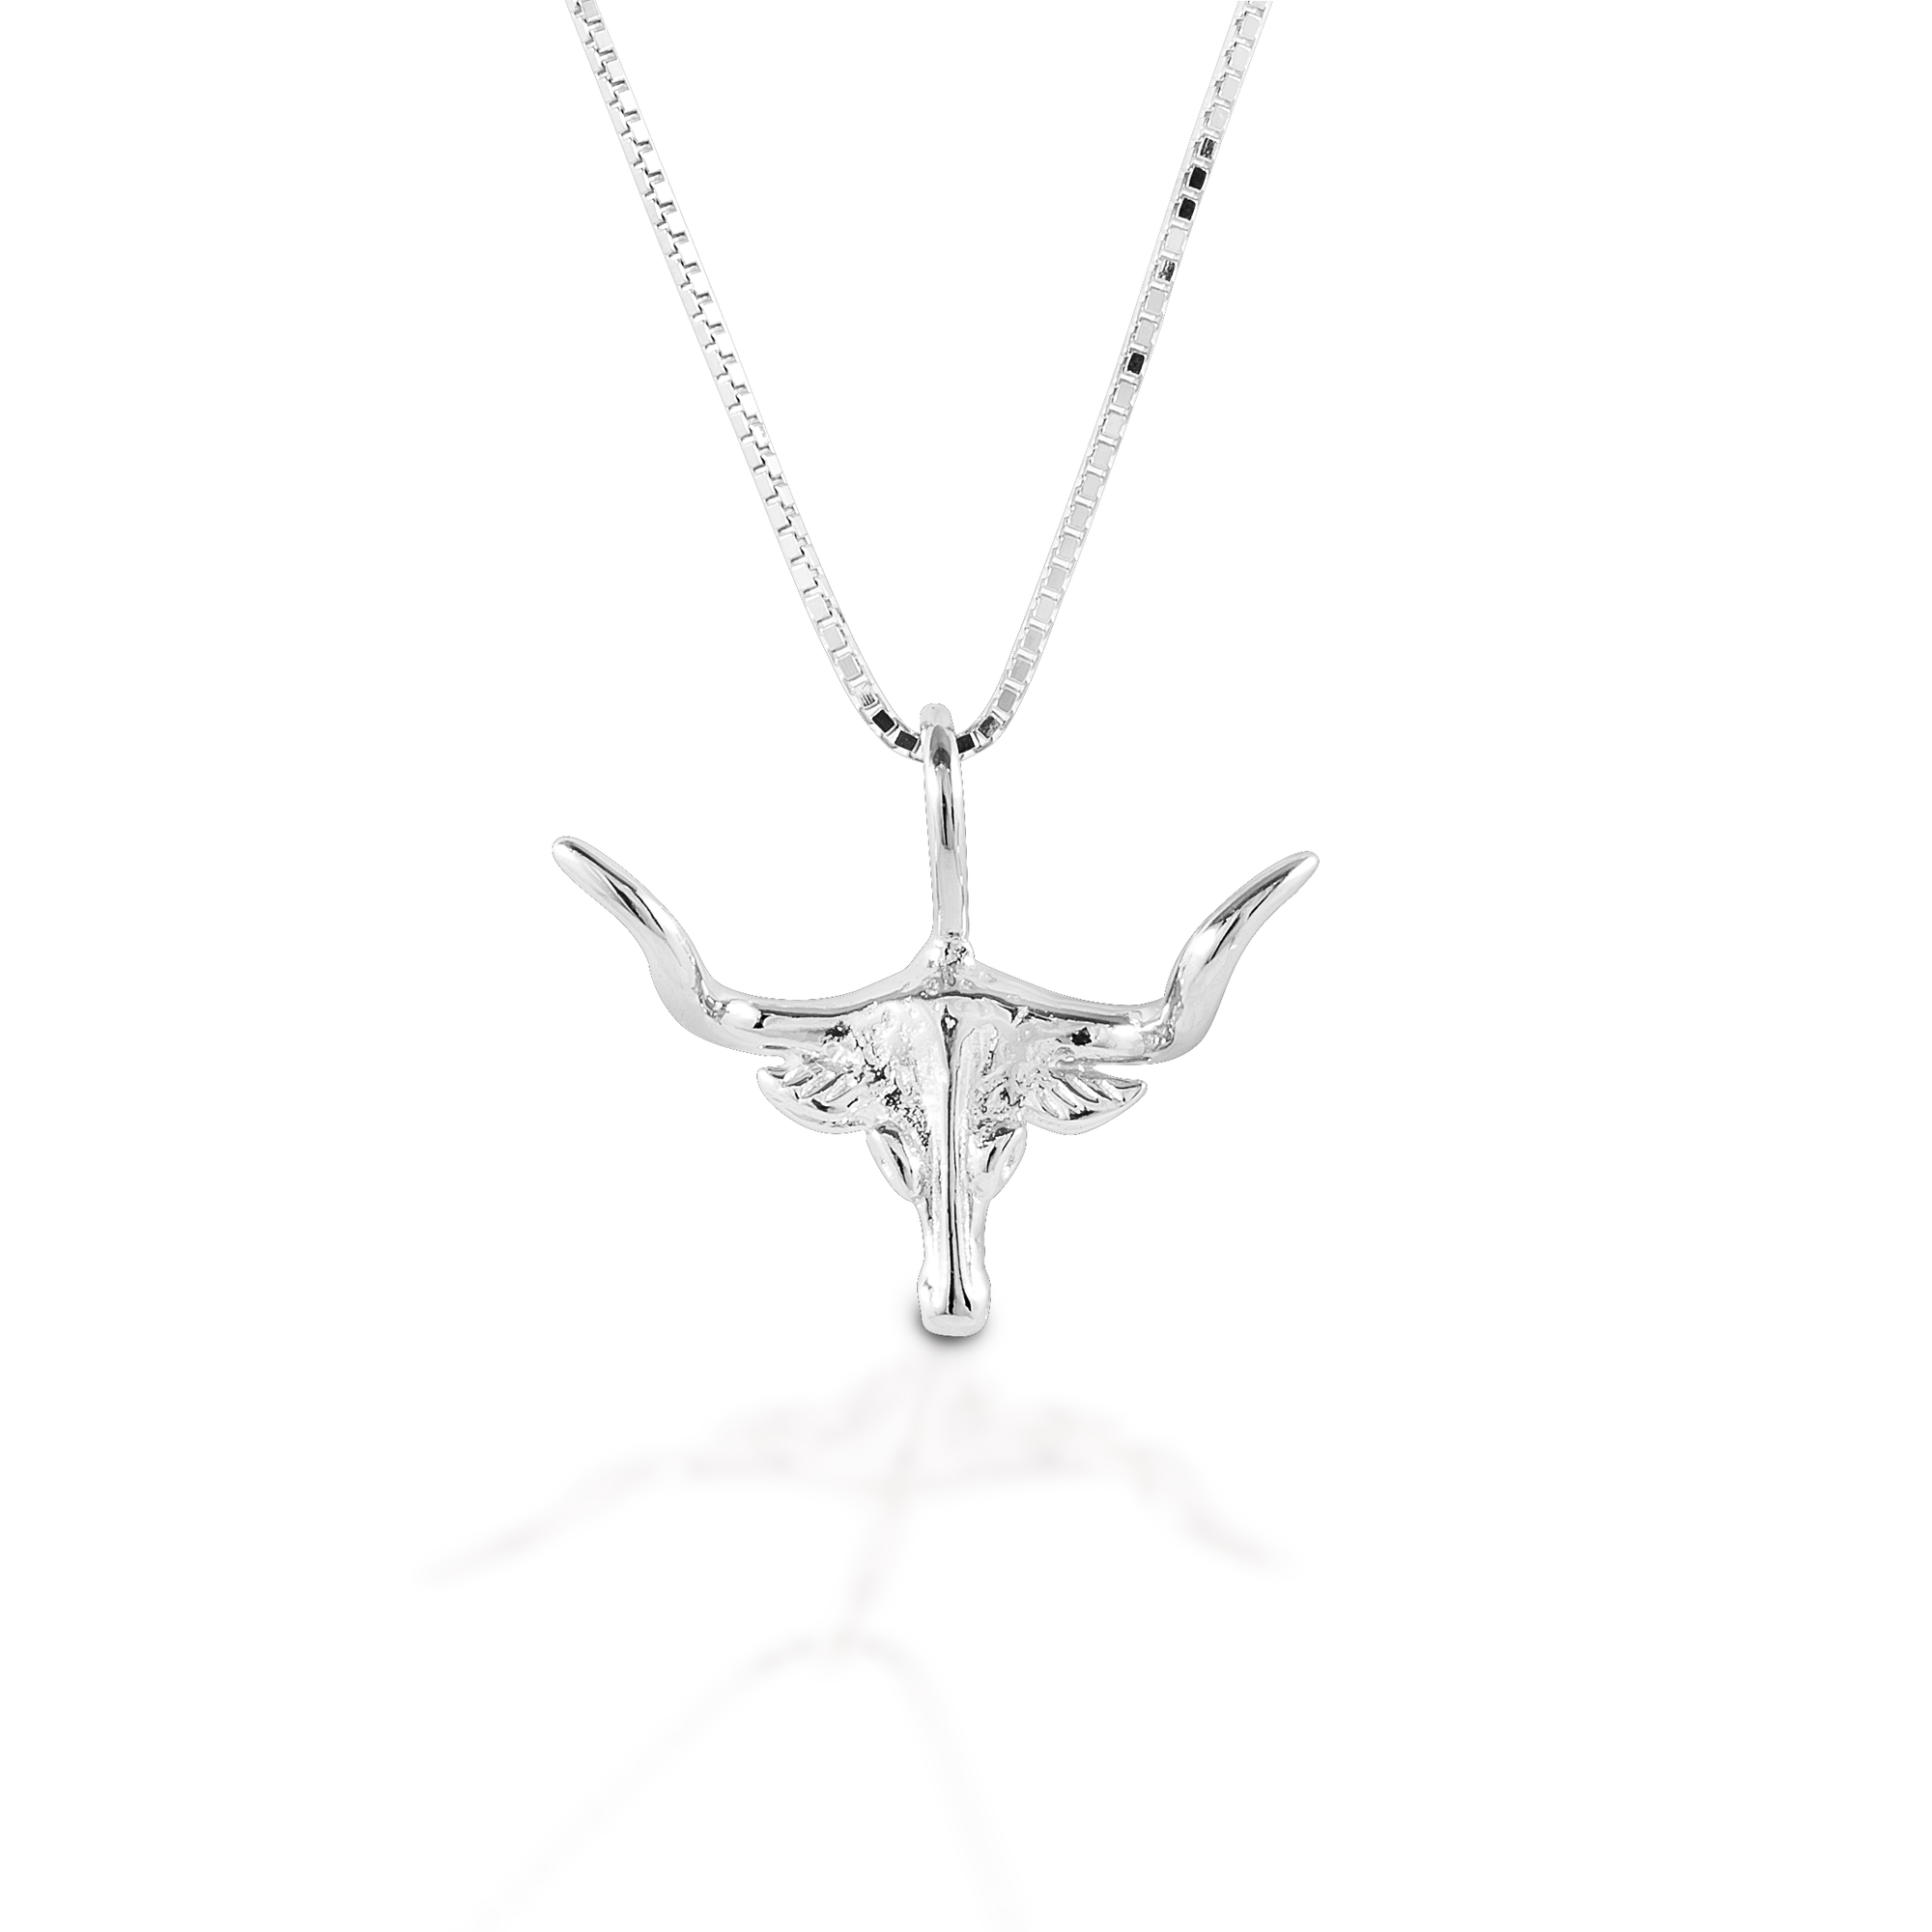 Kelly Herd Small Longhorn Necklace STYLE S5E